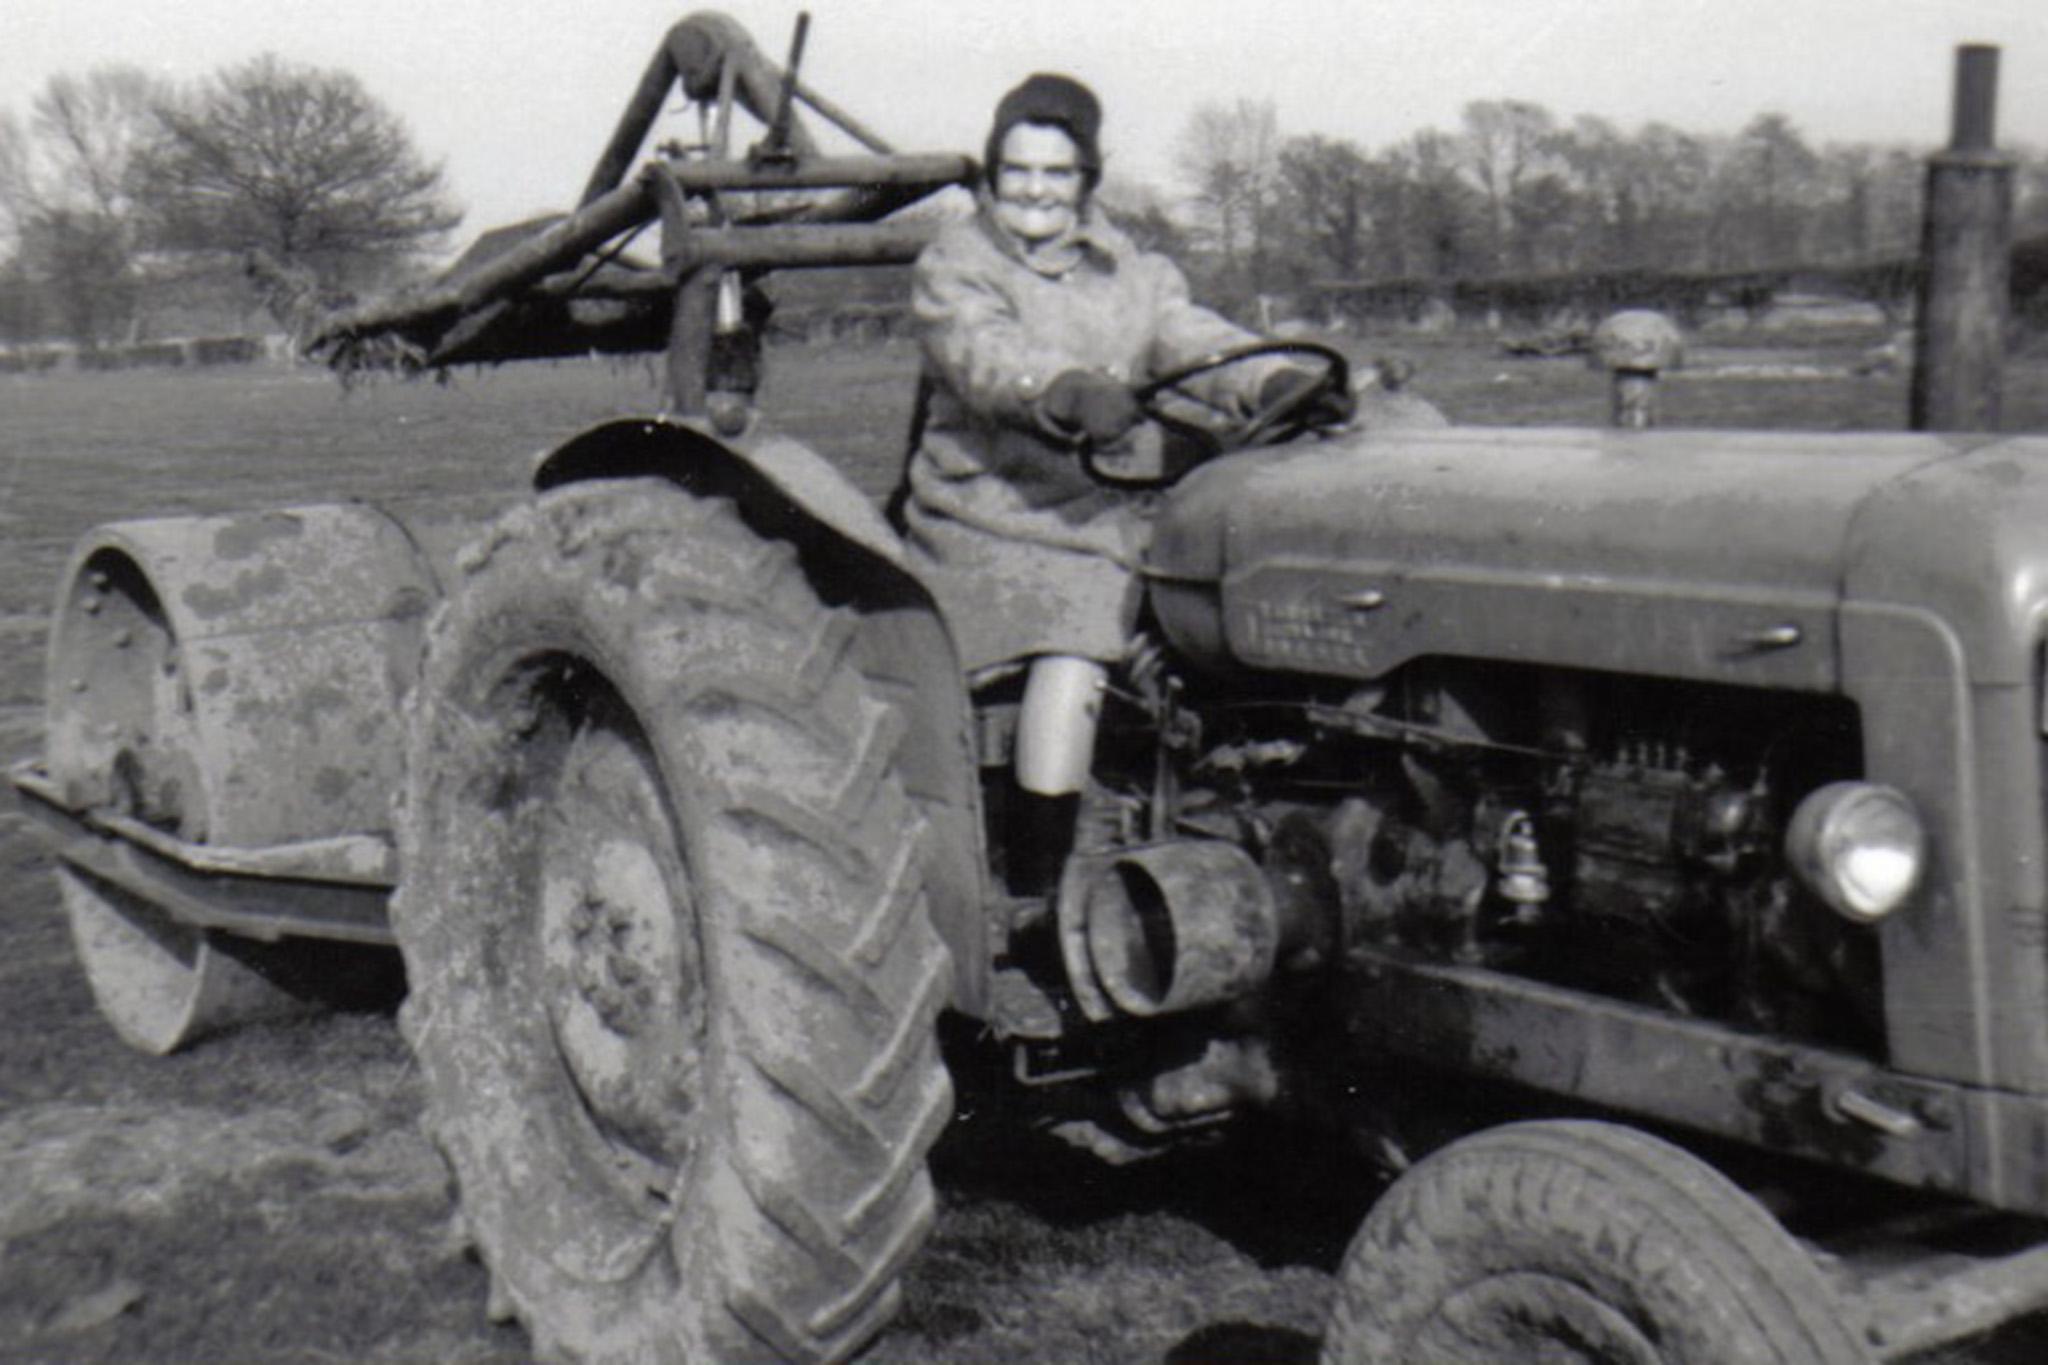 Great-grandma could drive a tractor